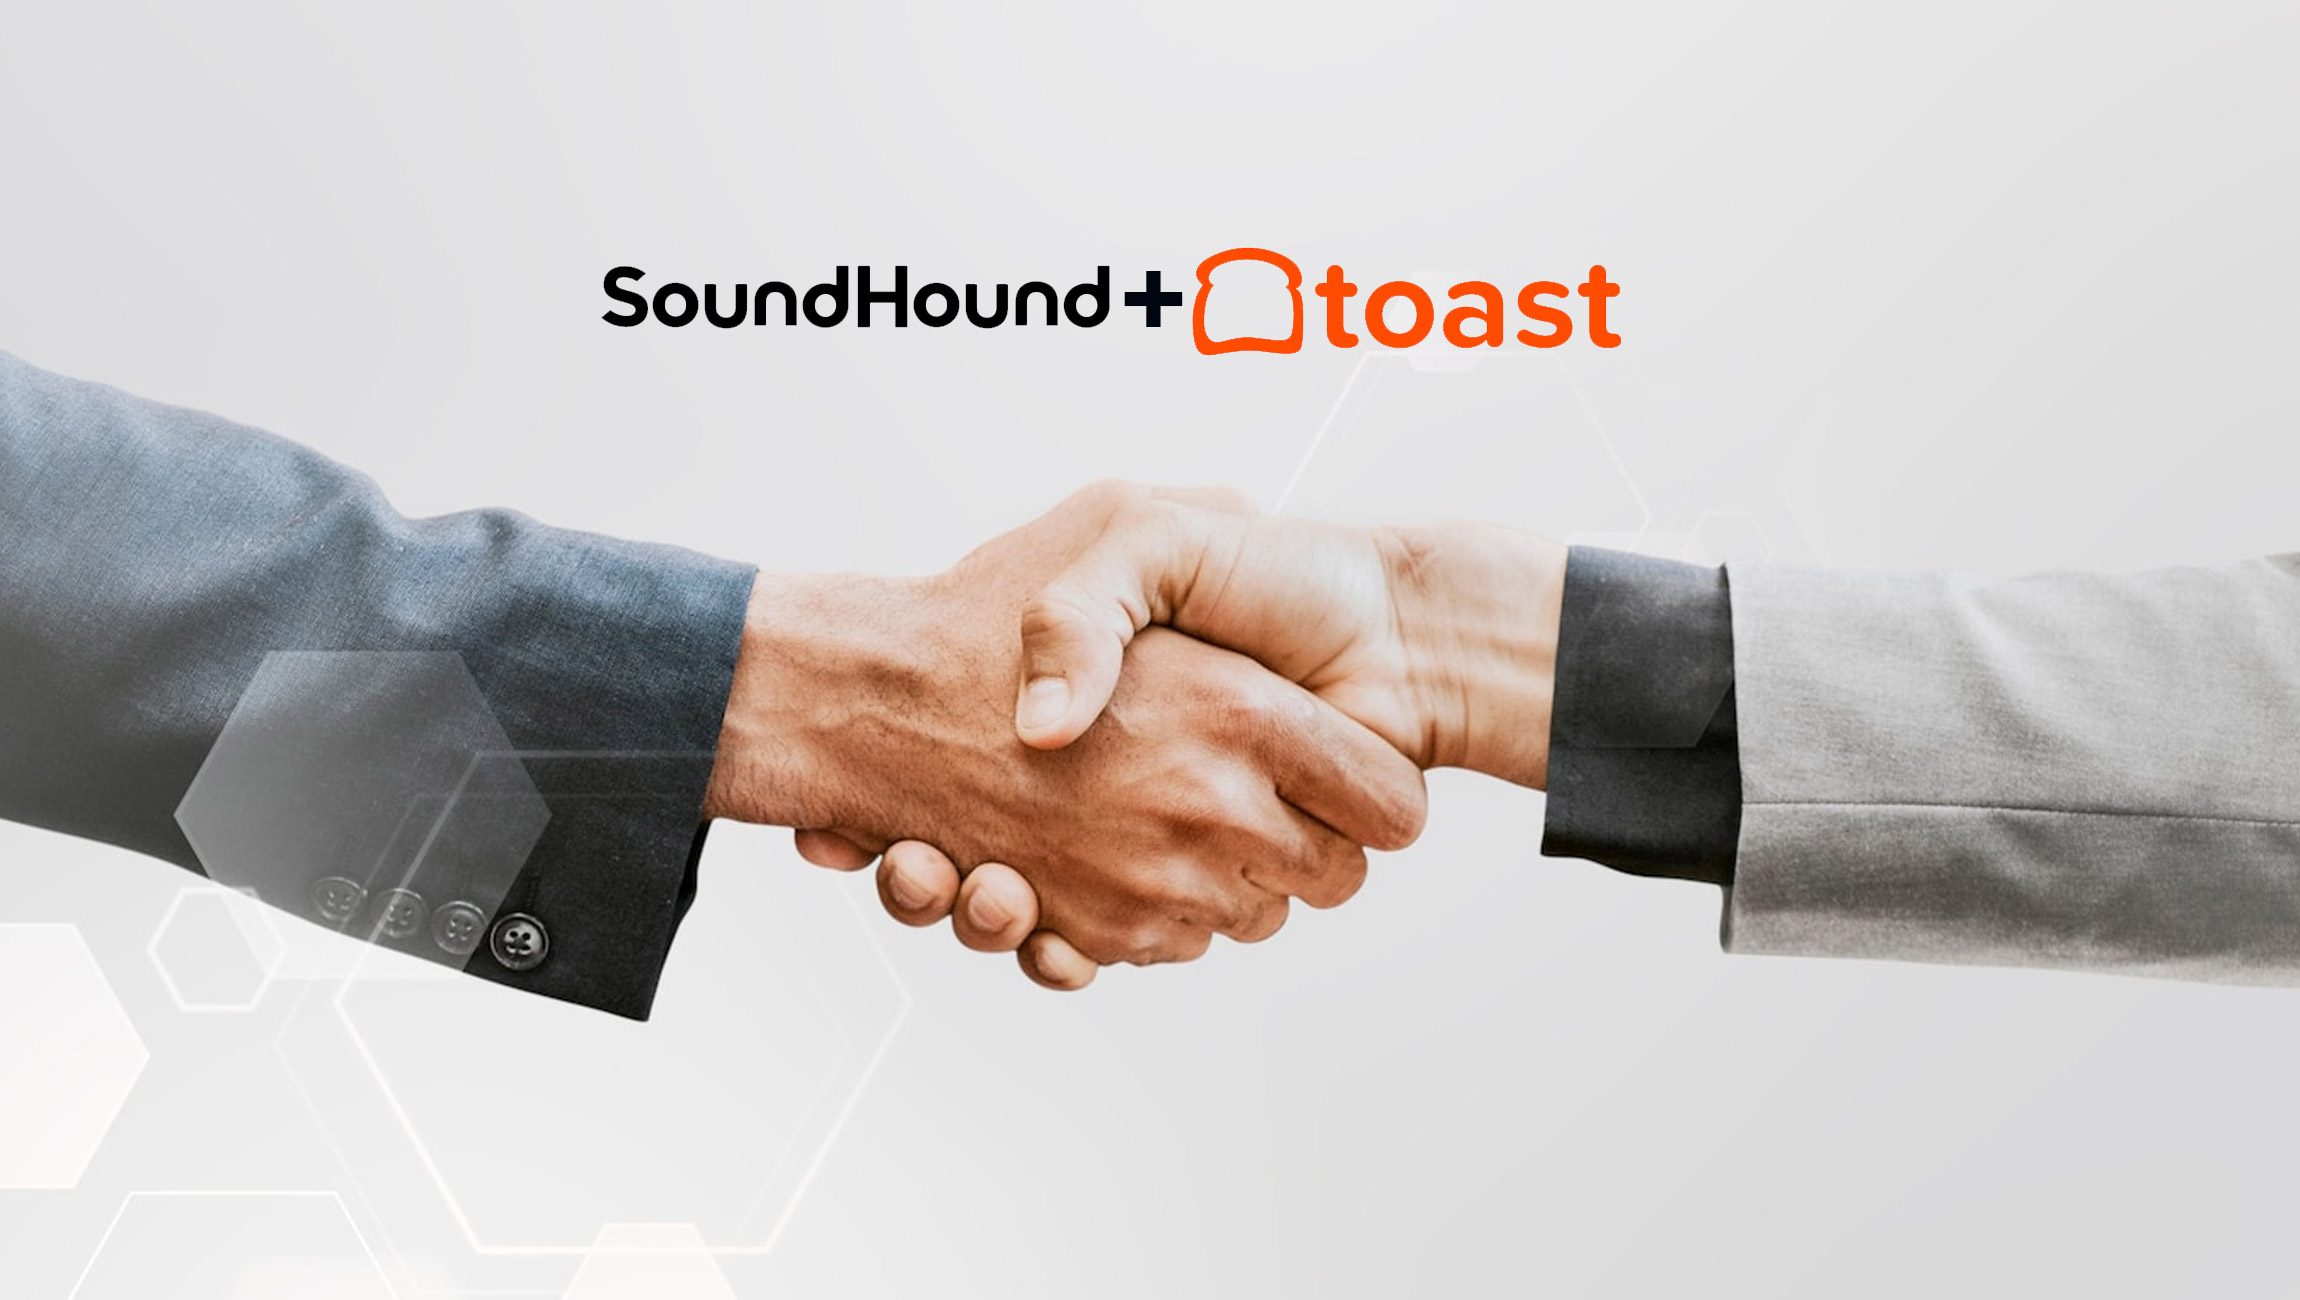 SoundHound for Restaurants Joins the Toast Partner Ecosystem to Help More Restaurants Offer Exceptional Voice Ordering Experiences